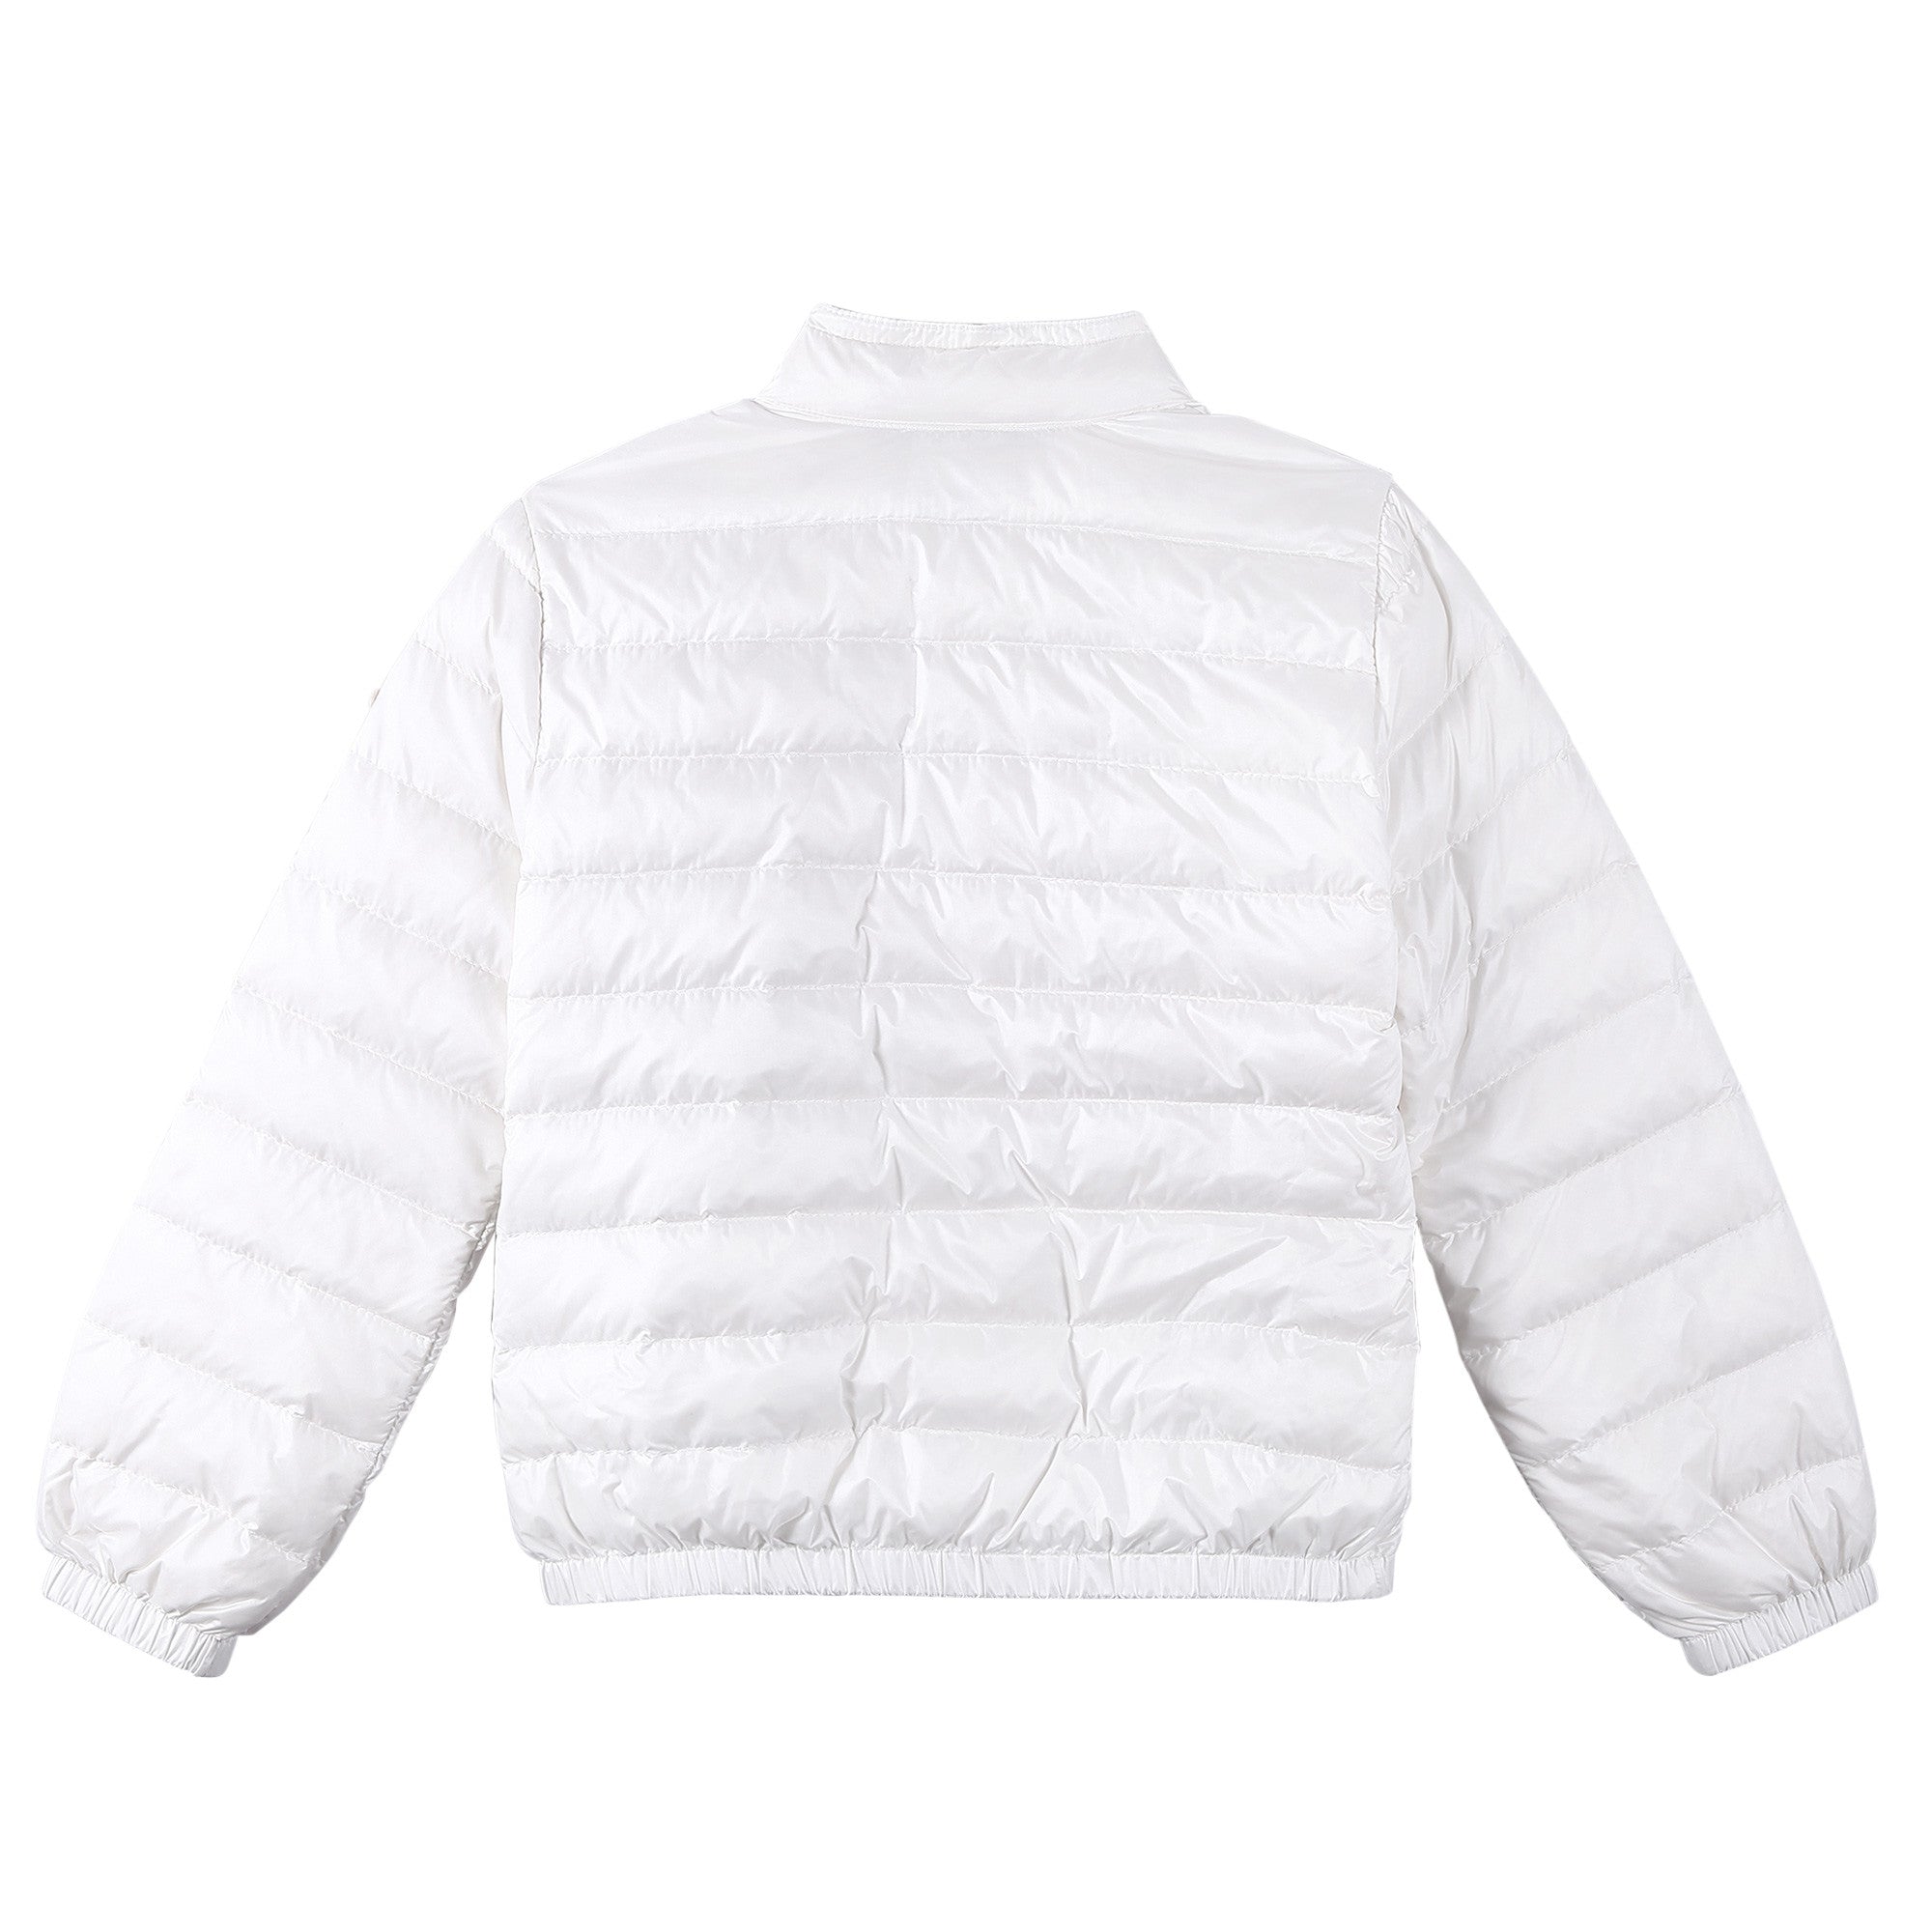 Girls White Down Padded 'Lans' Jacket With Patch Pocket - CÉMAROSE | Children's Fashion Store - 2